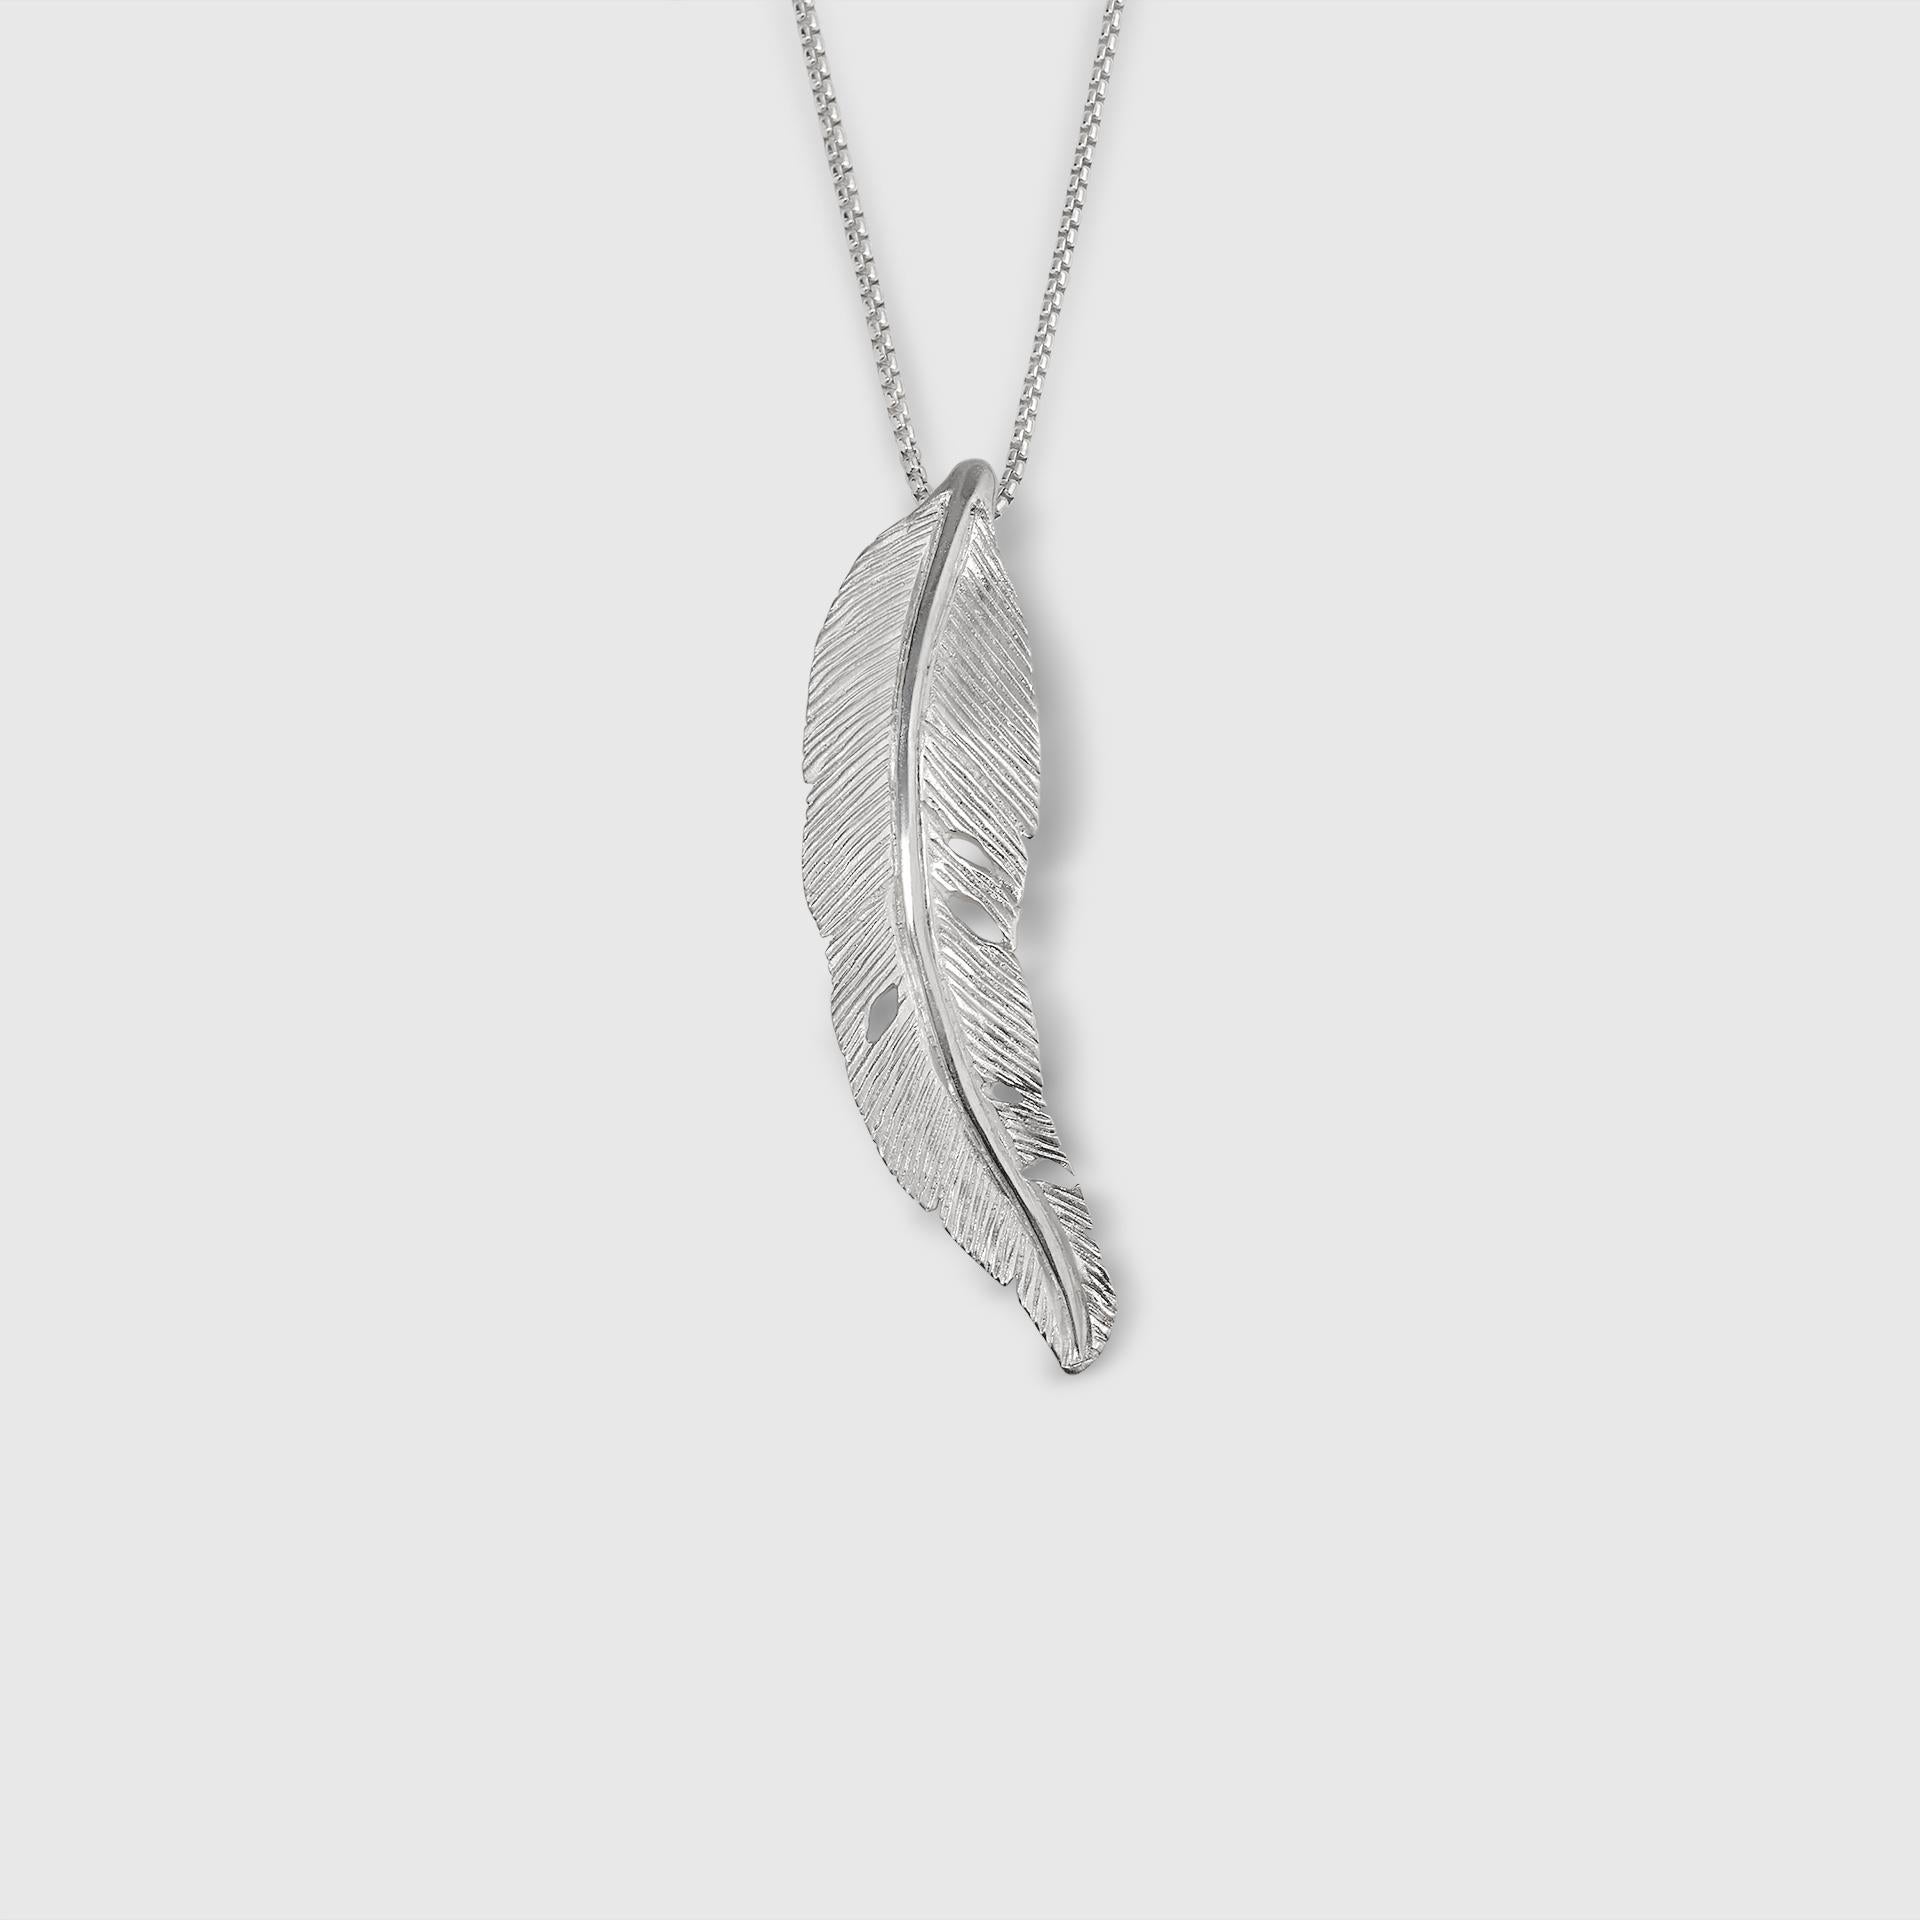 Small, Sterling Silver Detailed Feather Pendant by Ashley Childs

This feather was originally carved by 